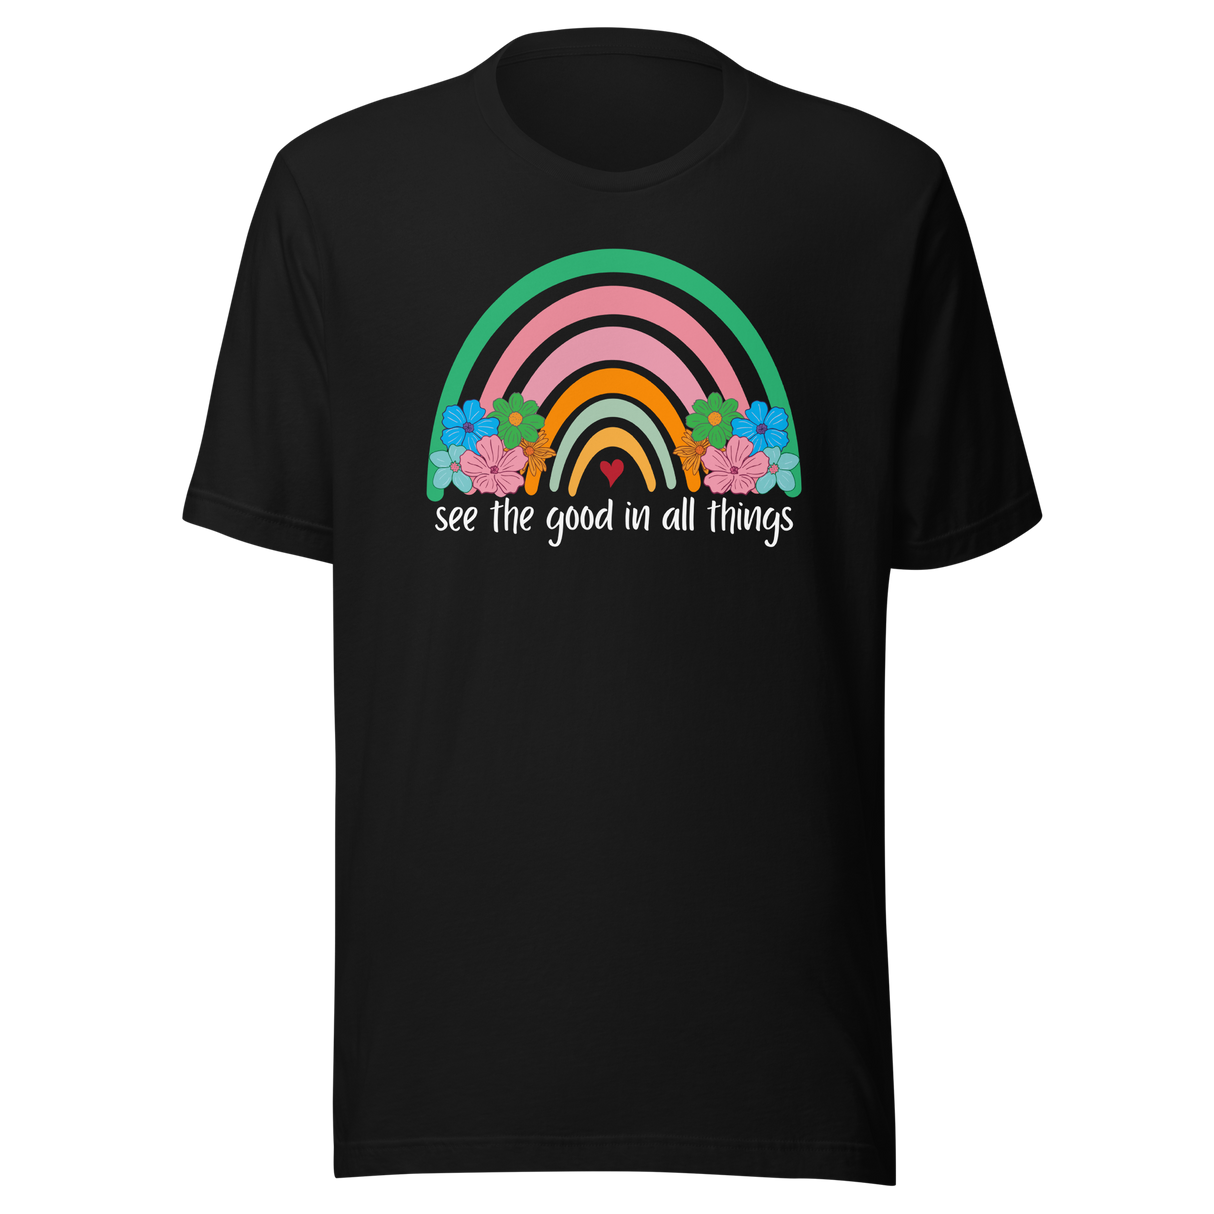 See The Good In All Things - Life Tee - Motivational T-Shirt - Positive Tee - Optimism T-Shirt - Gratitude Tee